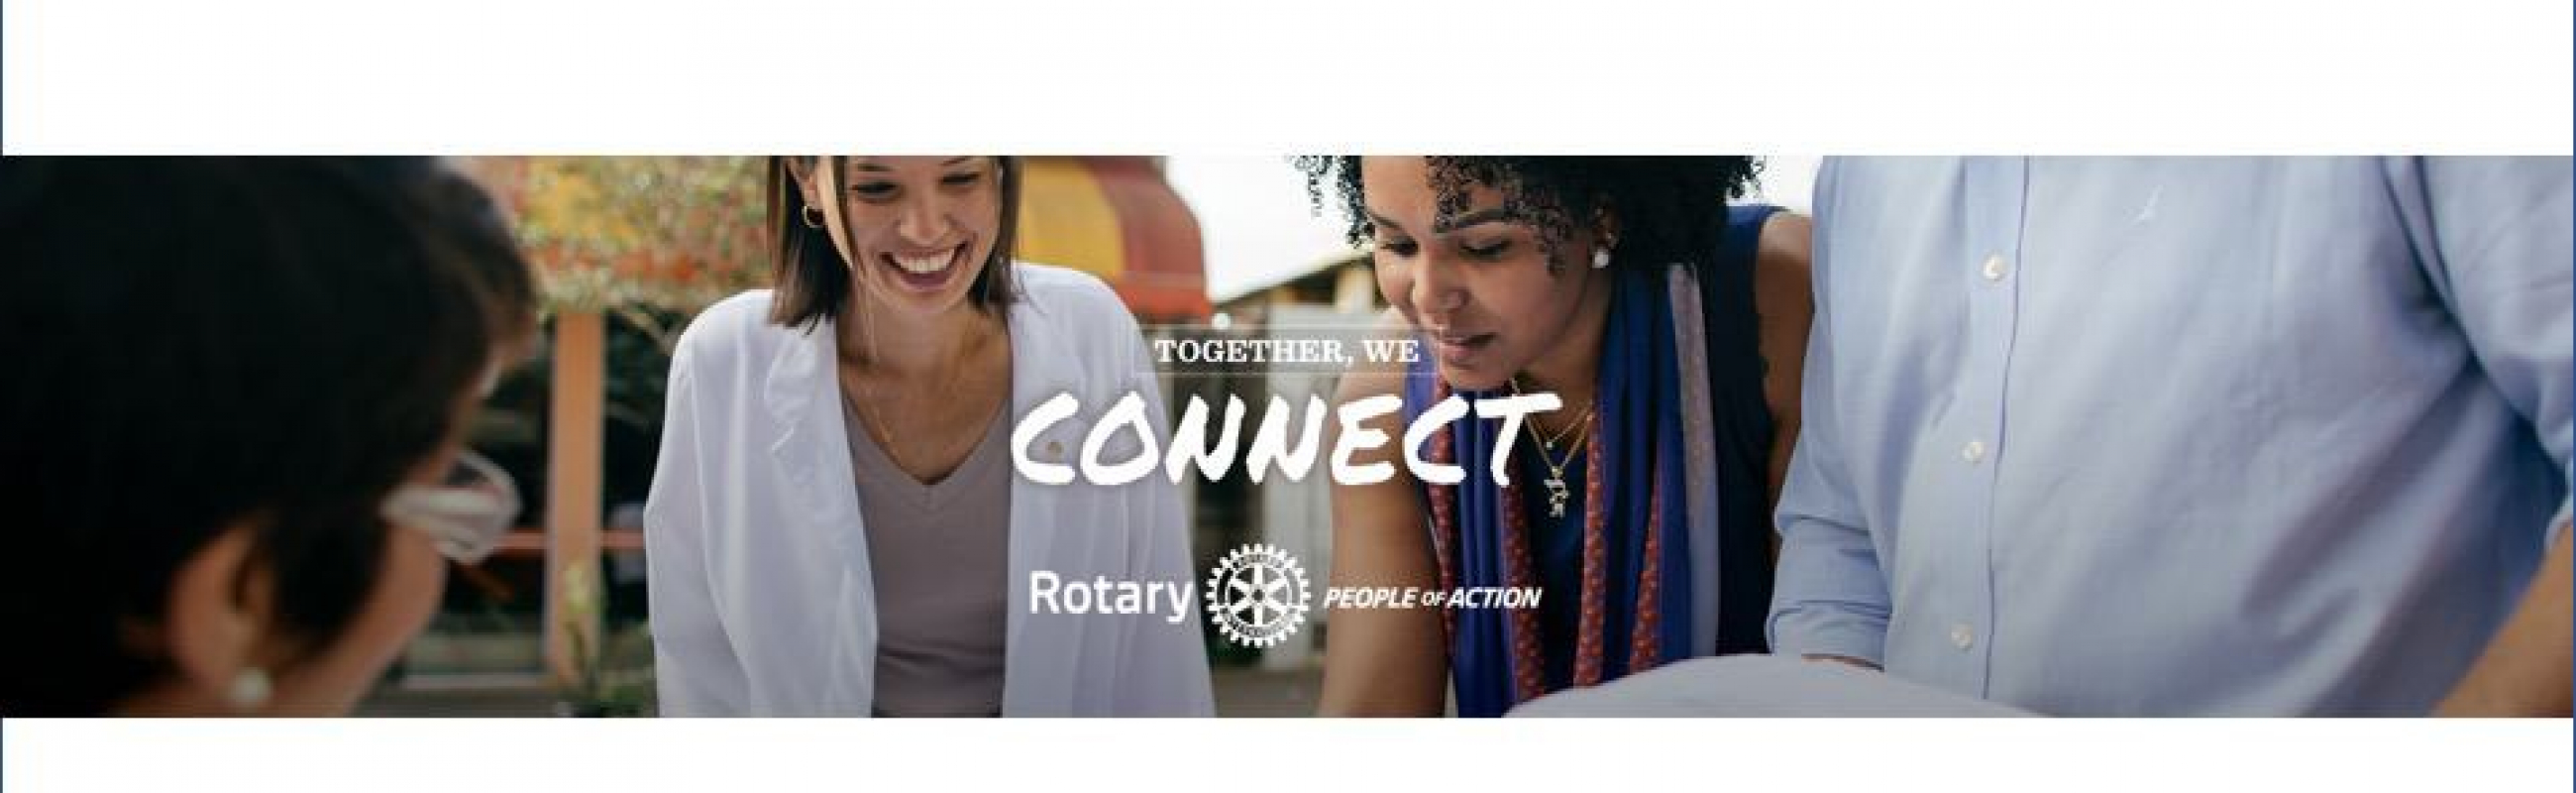 together_we_connect_banner